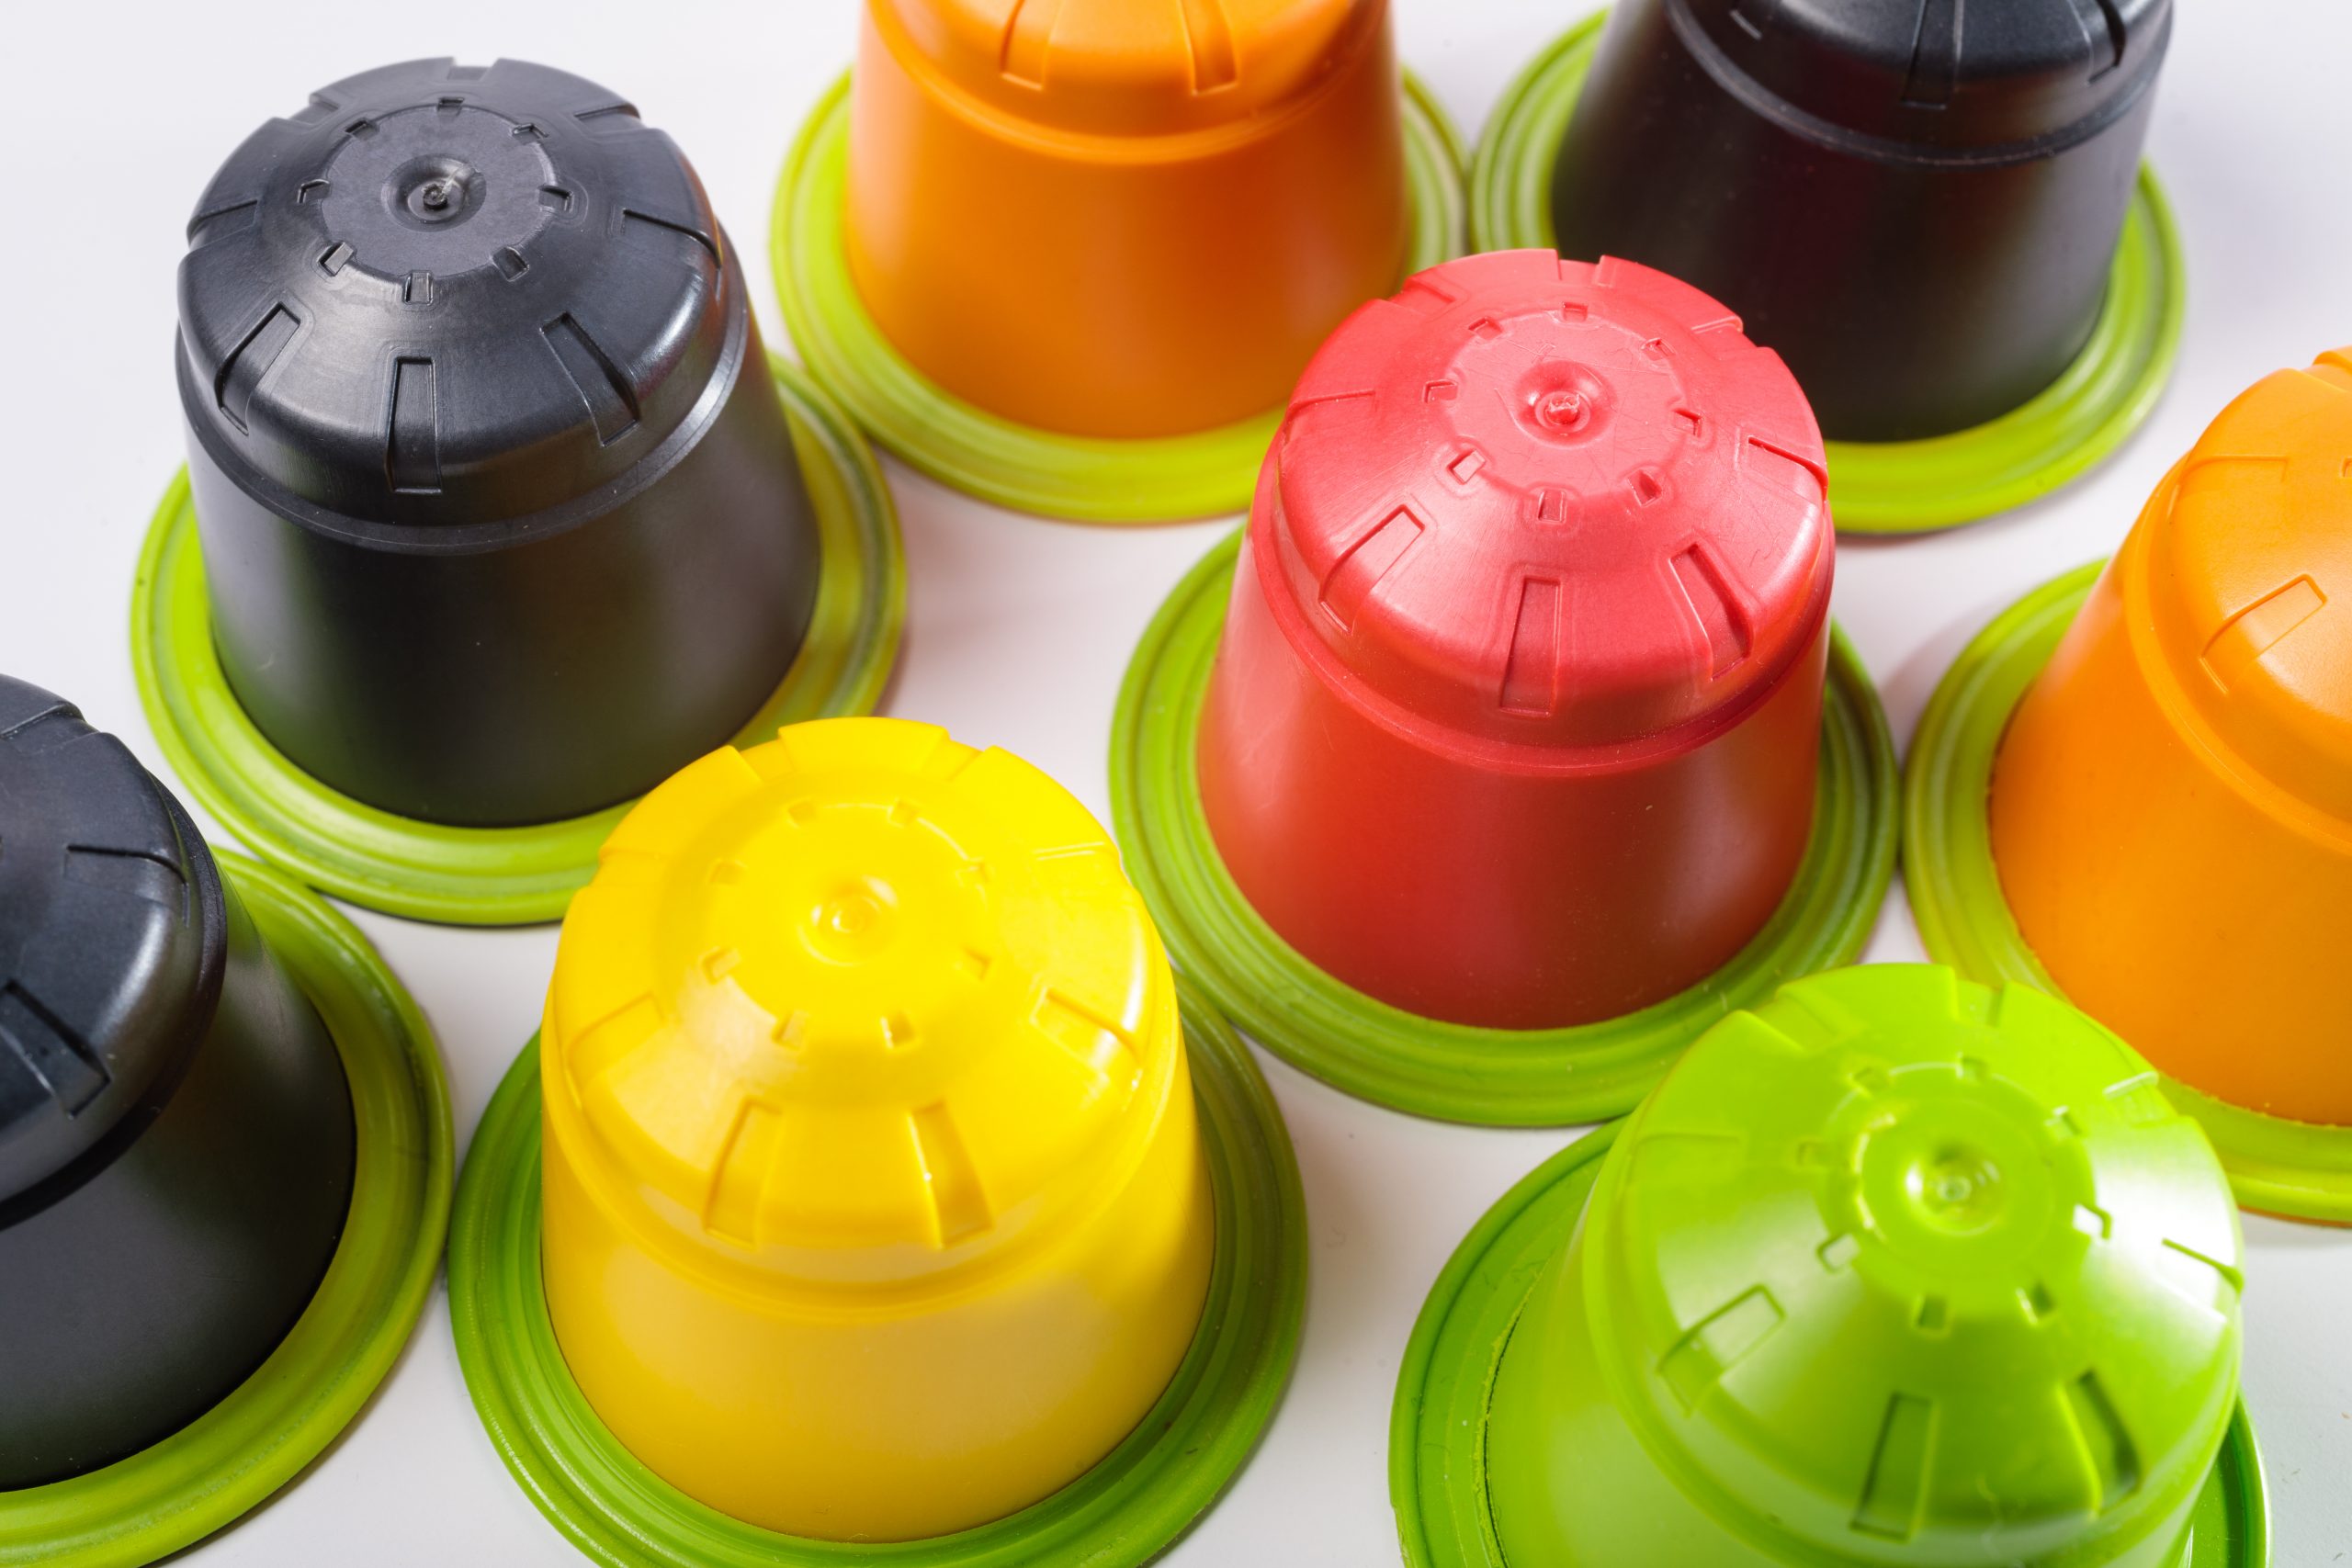 Coffee pods made of PLA